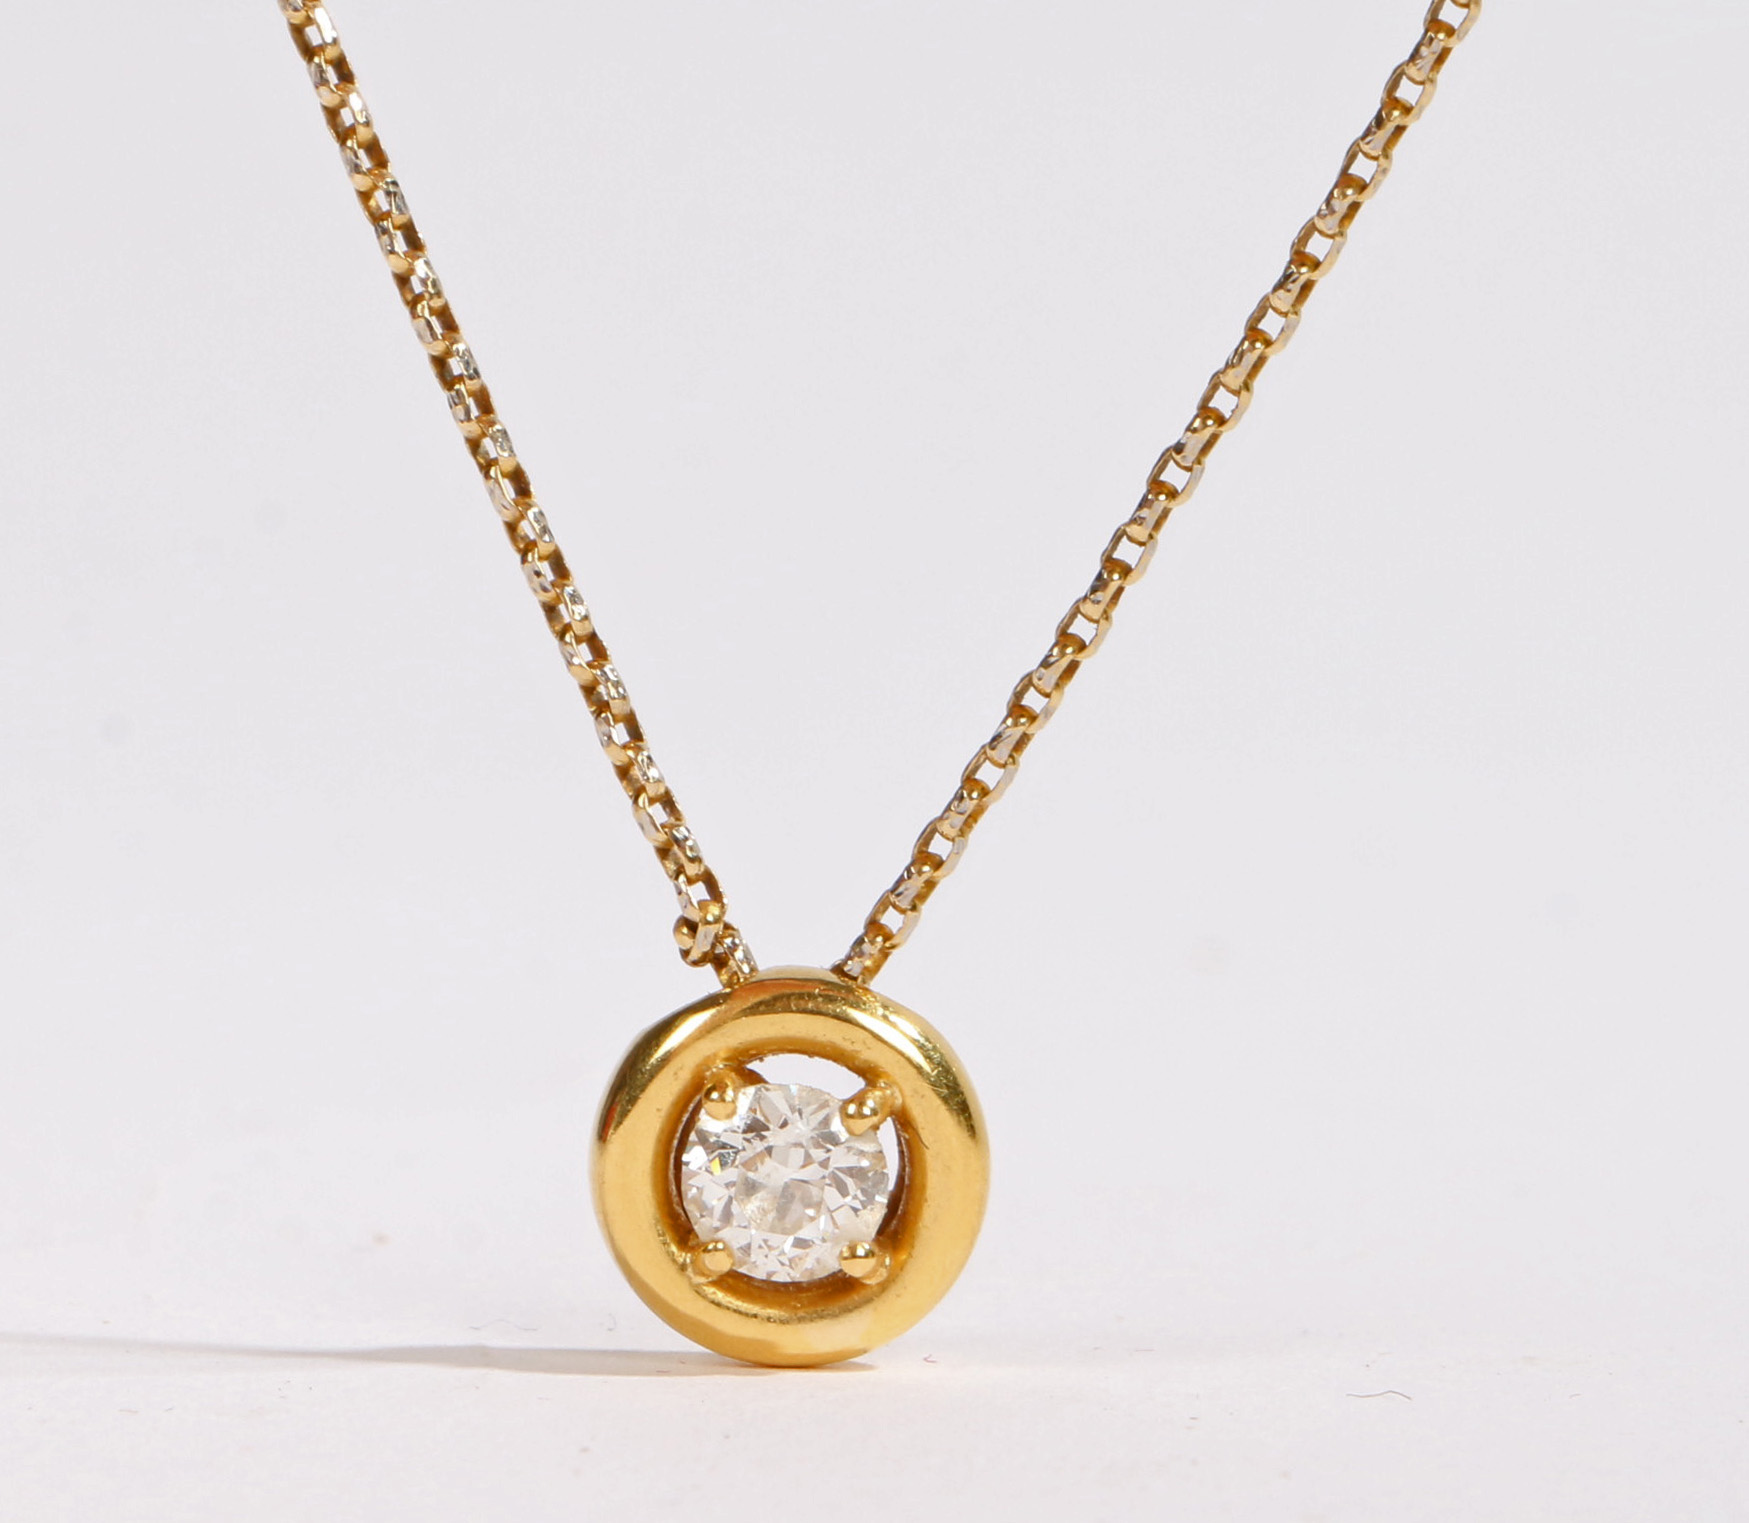 An 18 carat yellow gold and diamond pendant necklace, the pendant set with a single 0.6ct round